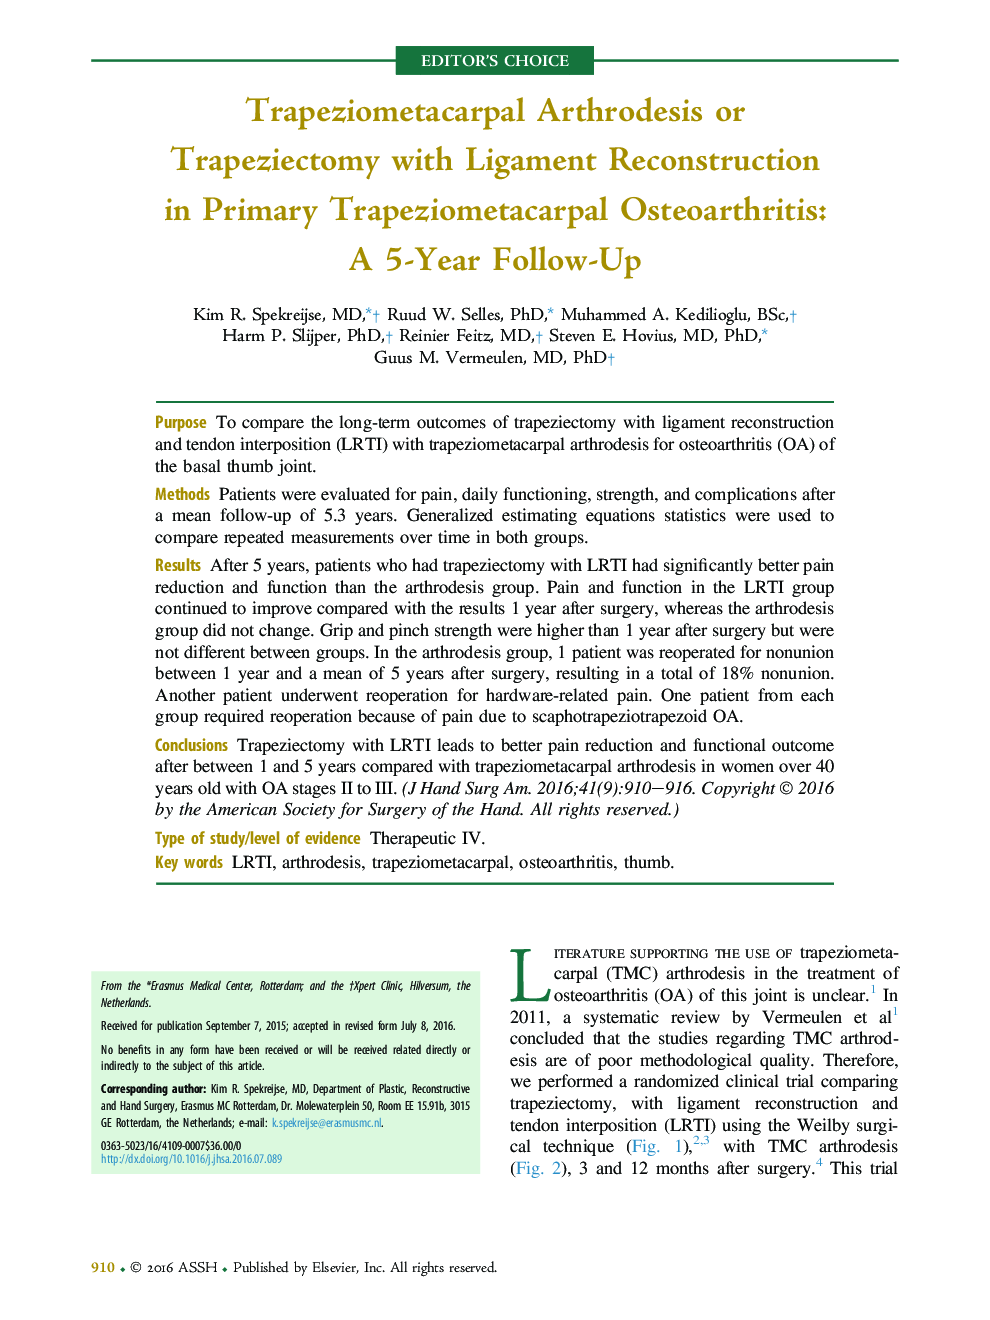 Trapeziometacarpal Arthrodesis or Trapeziectomy with Ligament Reconstruction in Primary Trapeziometacarpal Osteoarthritis: A 5-Year Follow-Up 